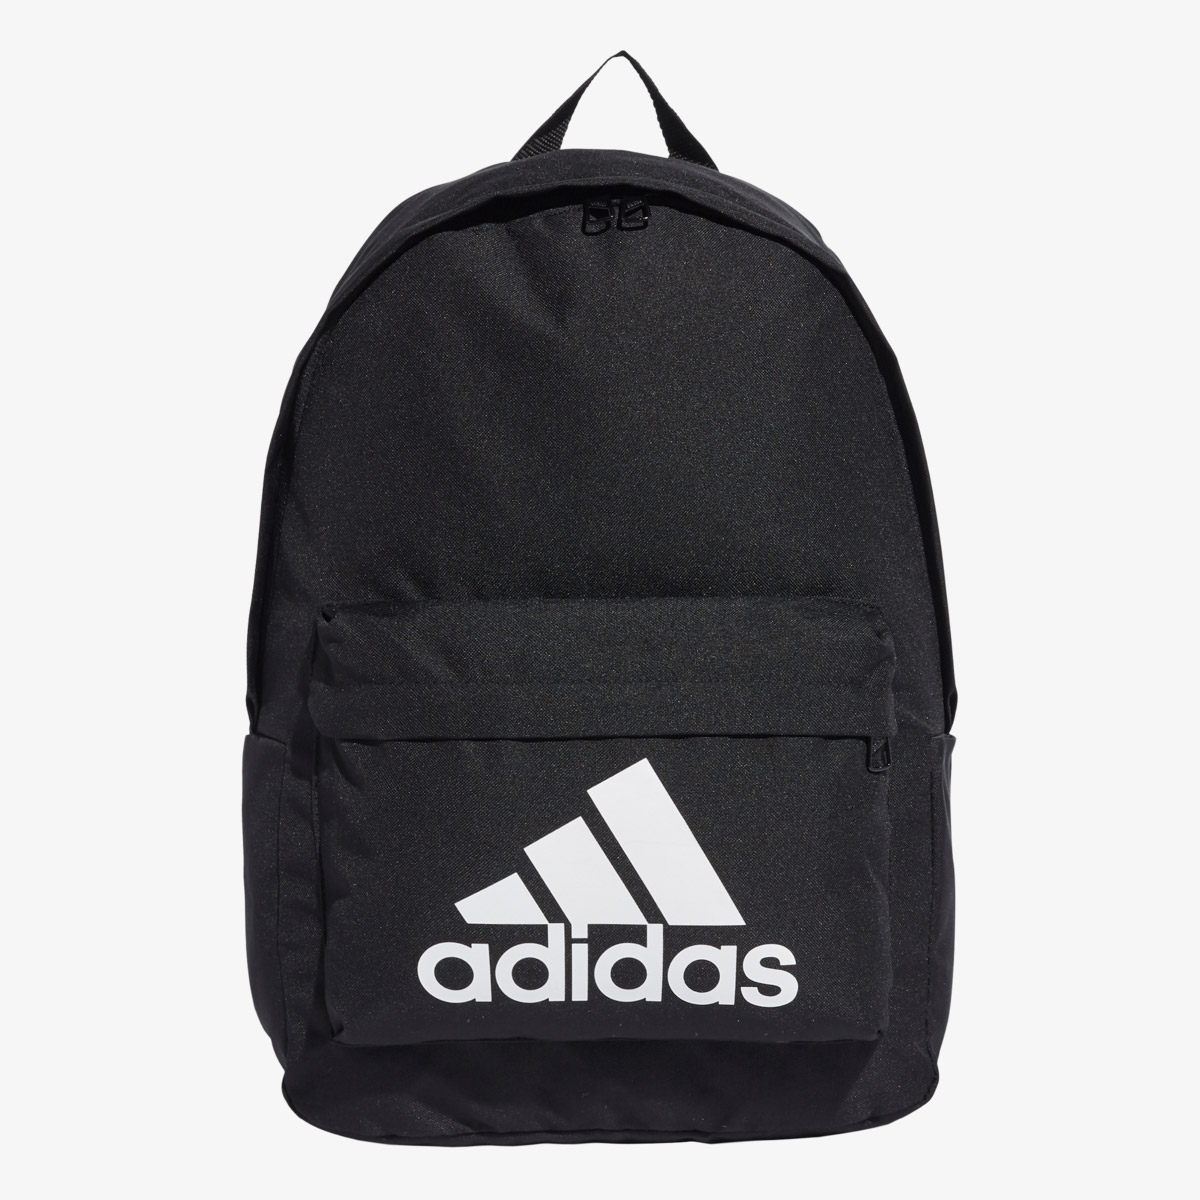 adidas adidas CLASSIC BACKPACK | Sport Vision